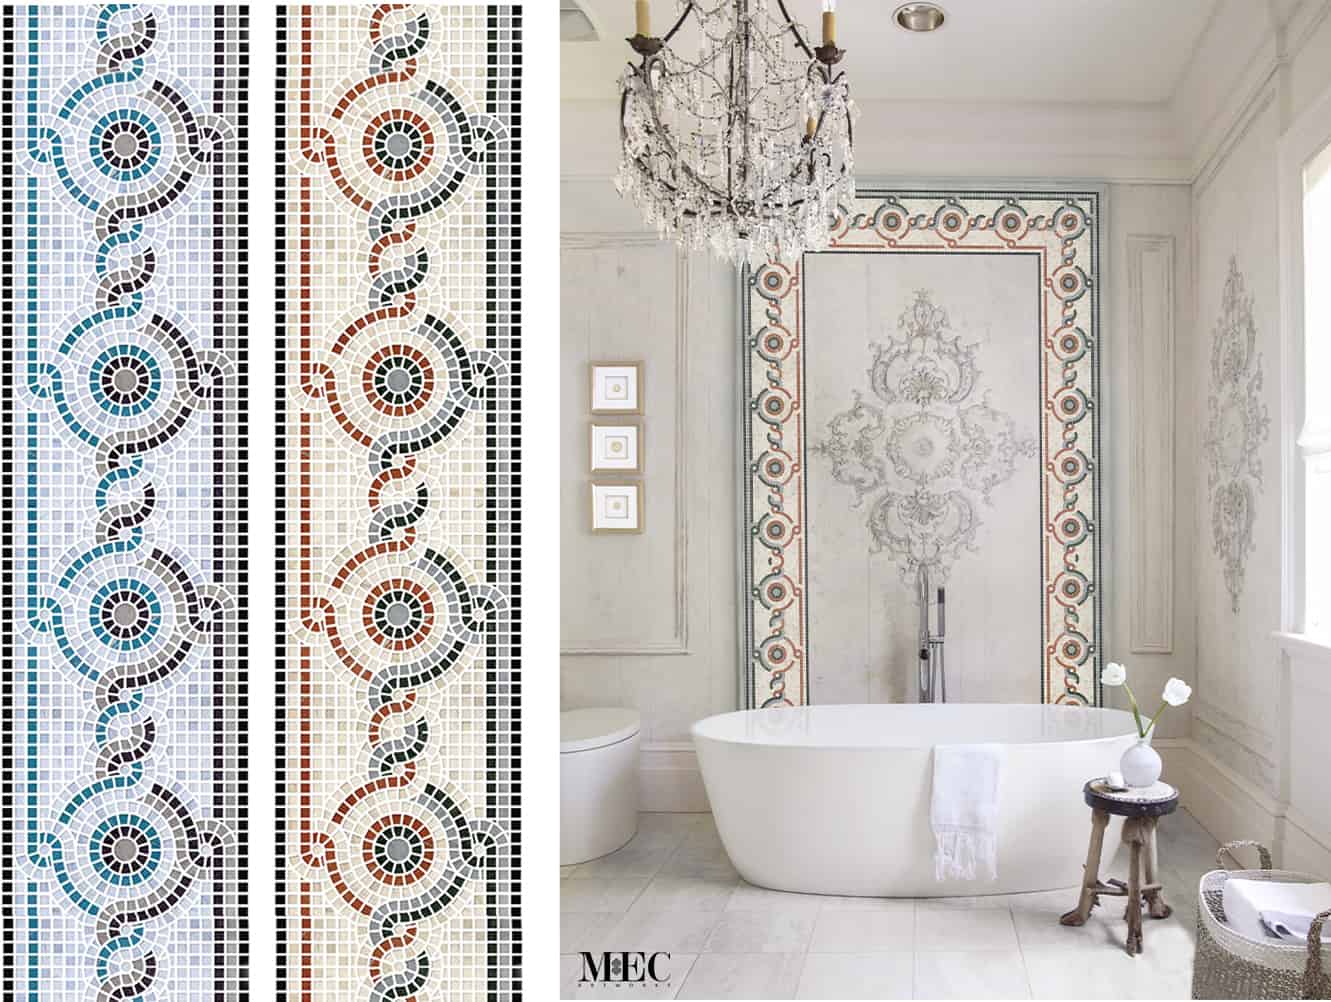 A collage of photo showing cuctom marble mosaic backsplashes order bath tub installation and a detailed close up of the design